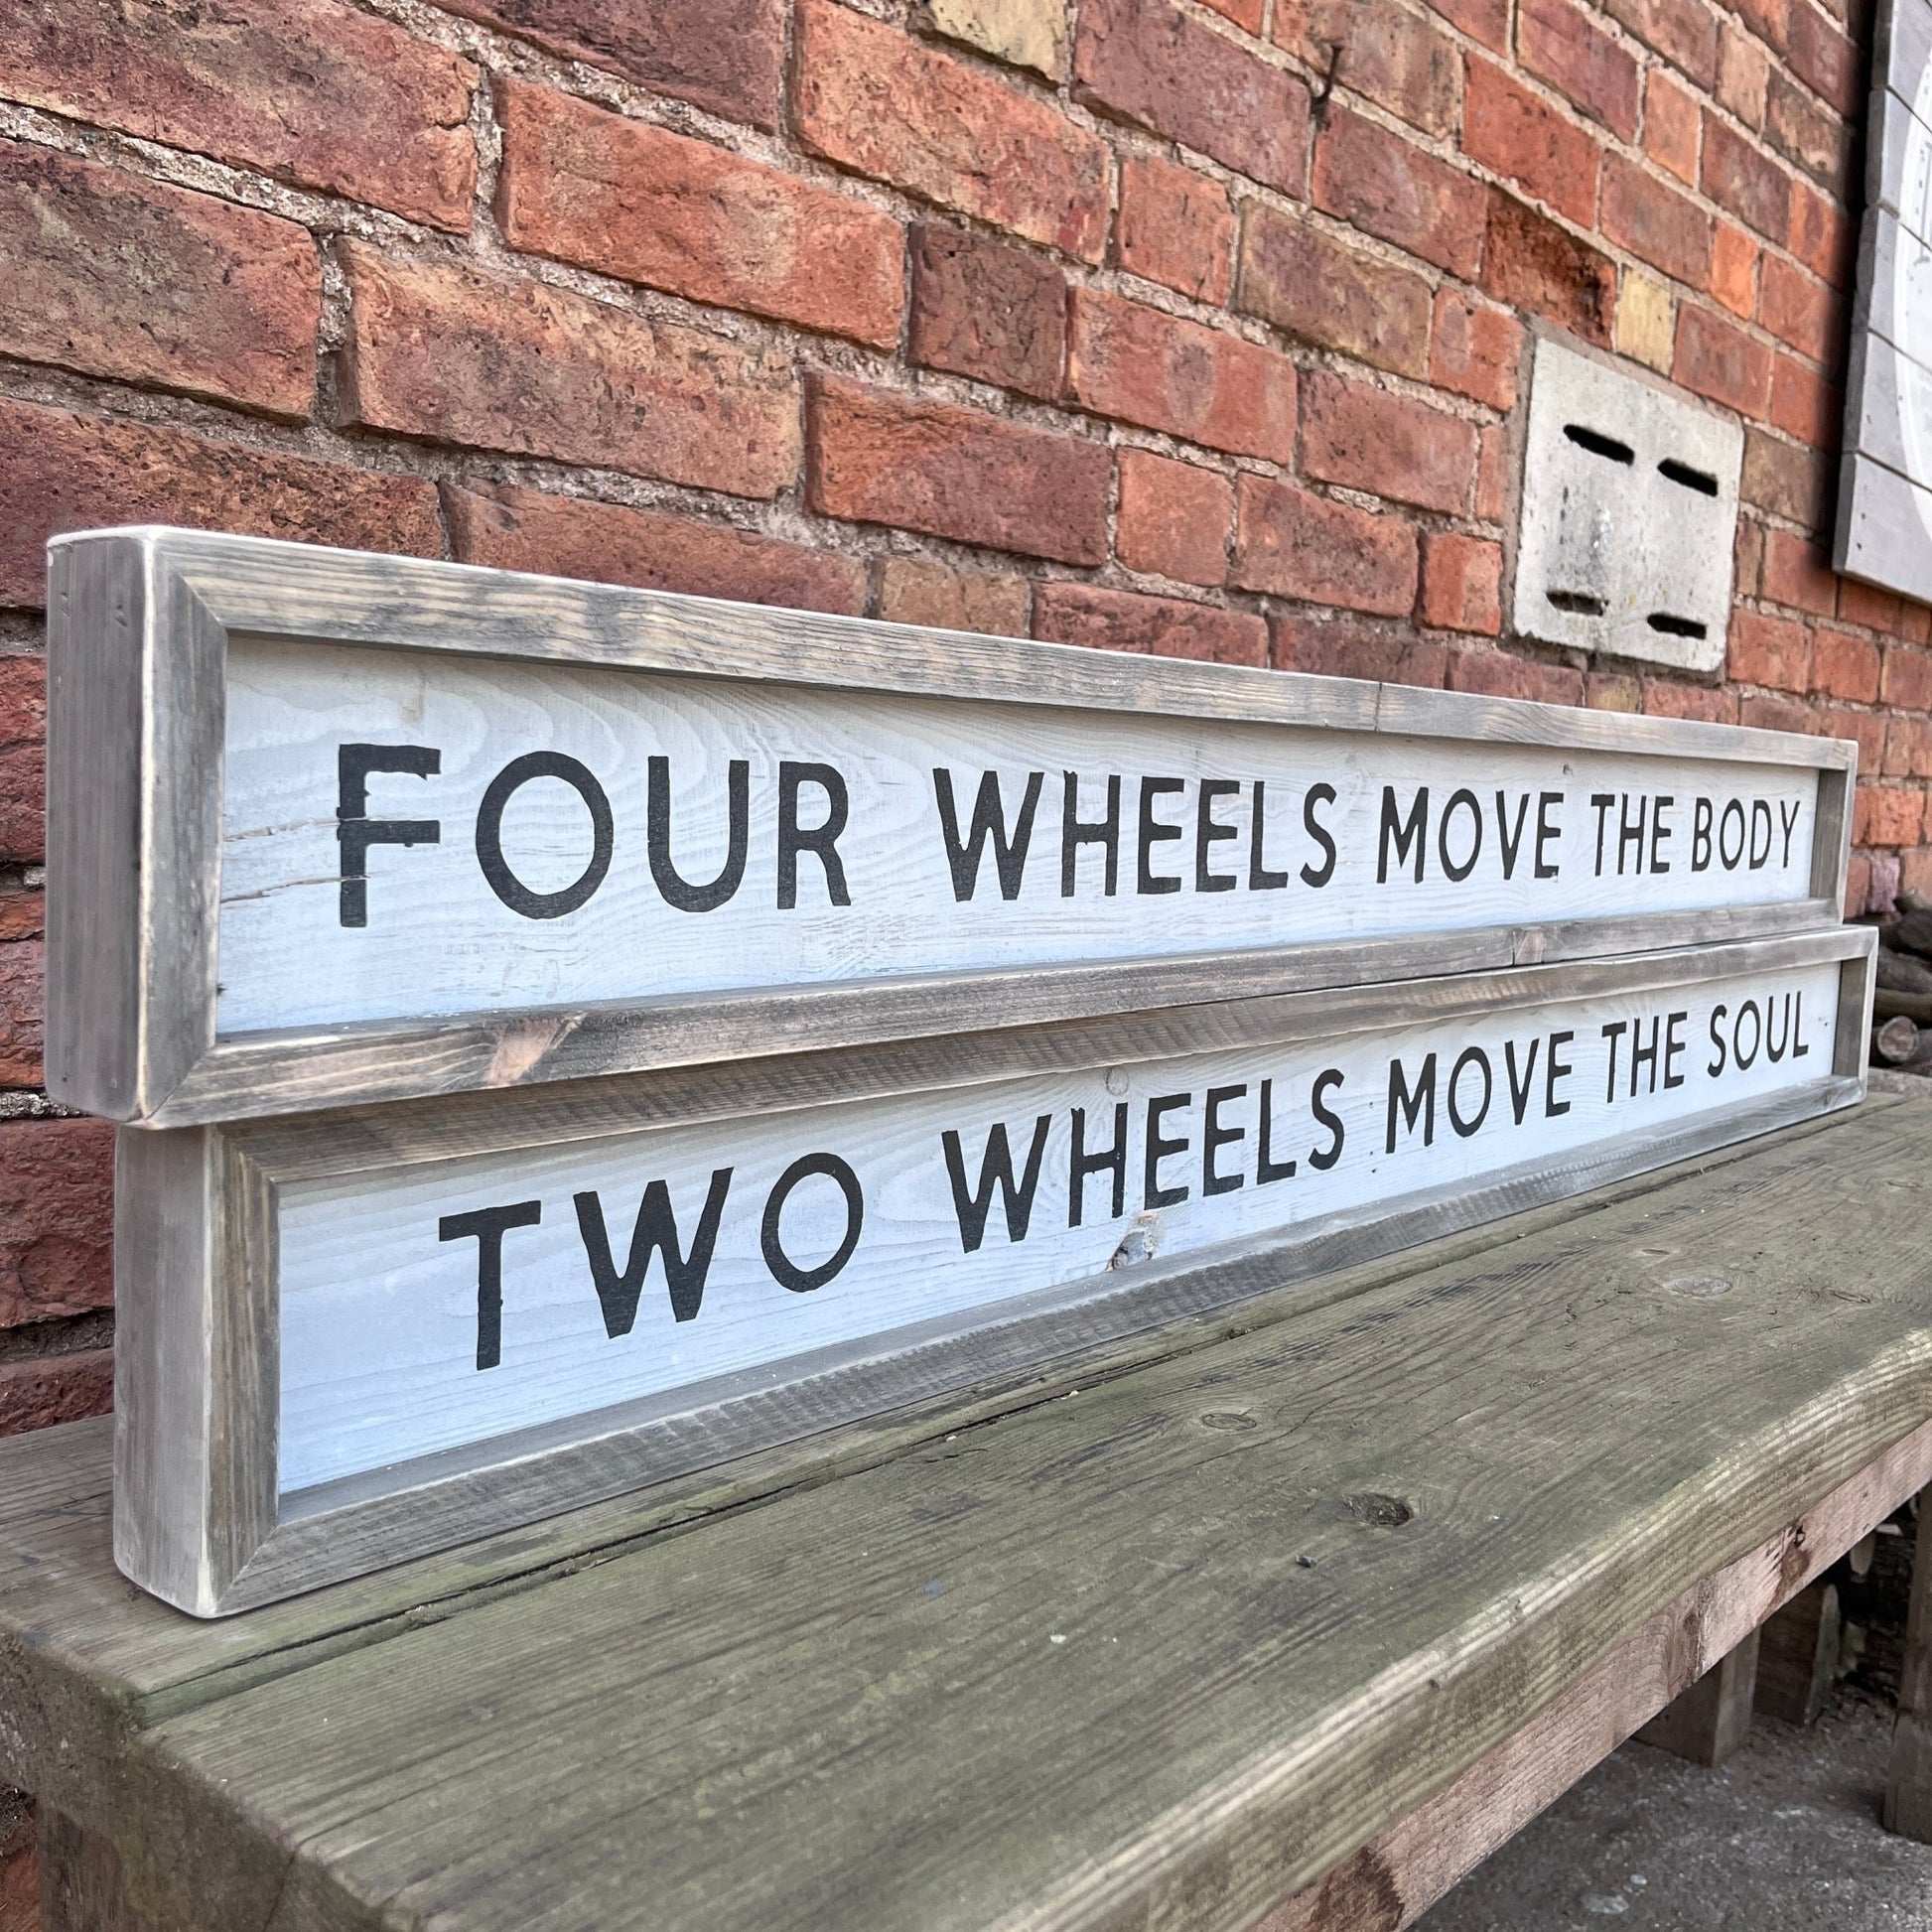 Two Wheels Move The Soul | Framed Long Wood Sign | Set of 2 - The Imperfect Wood Company - Rustic Framed Long Wood Sign